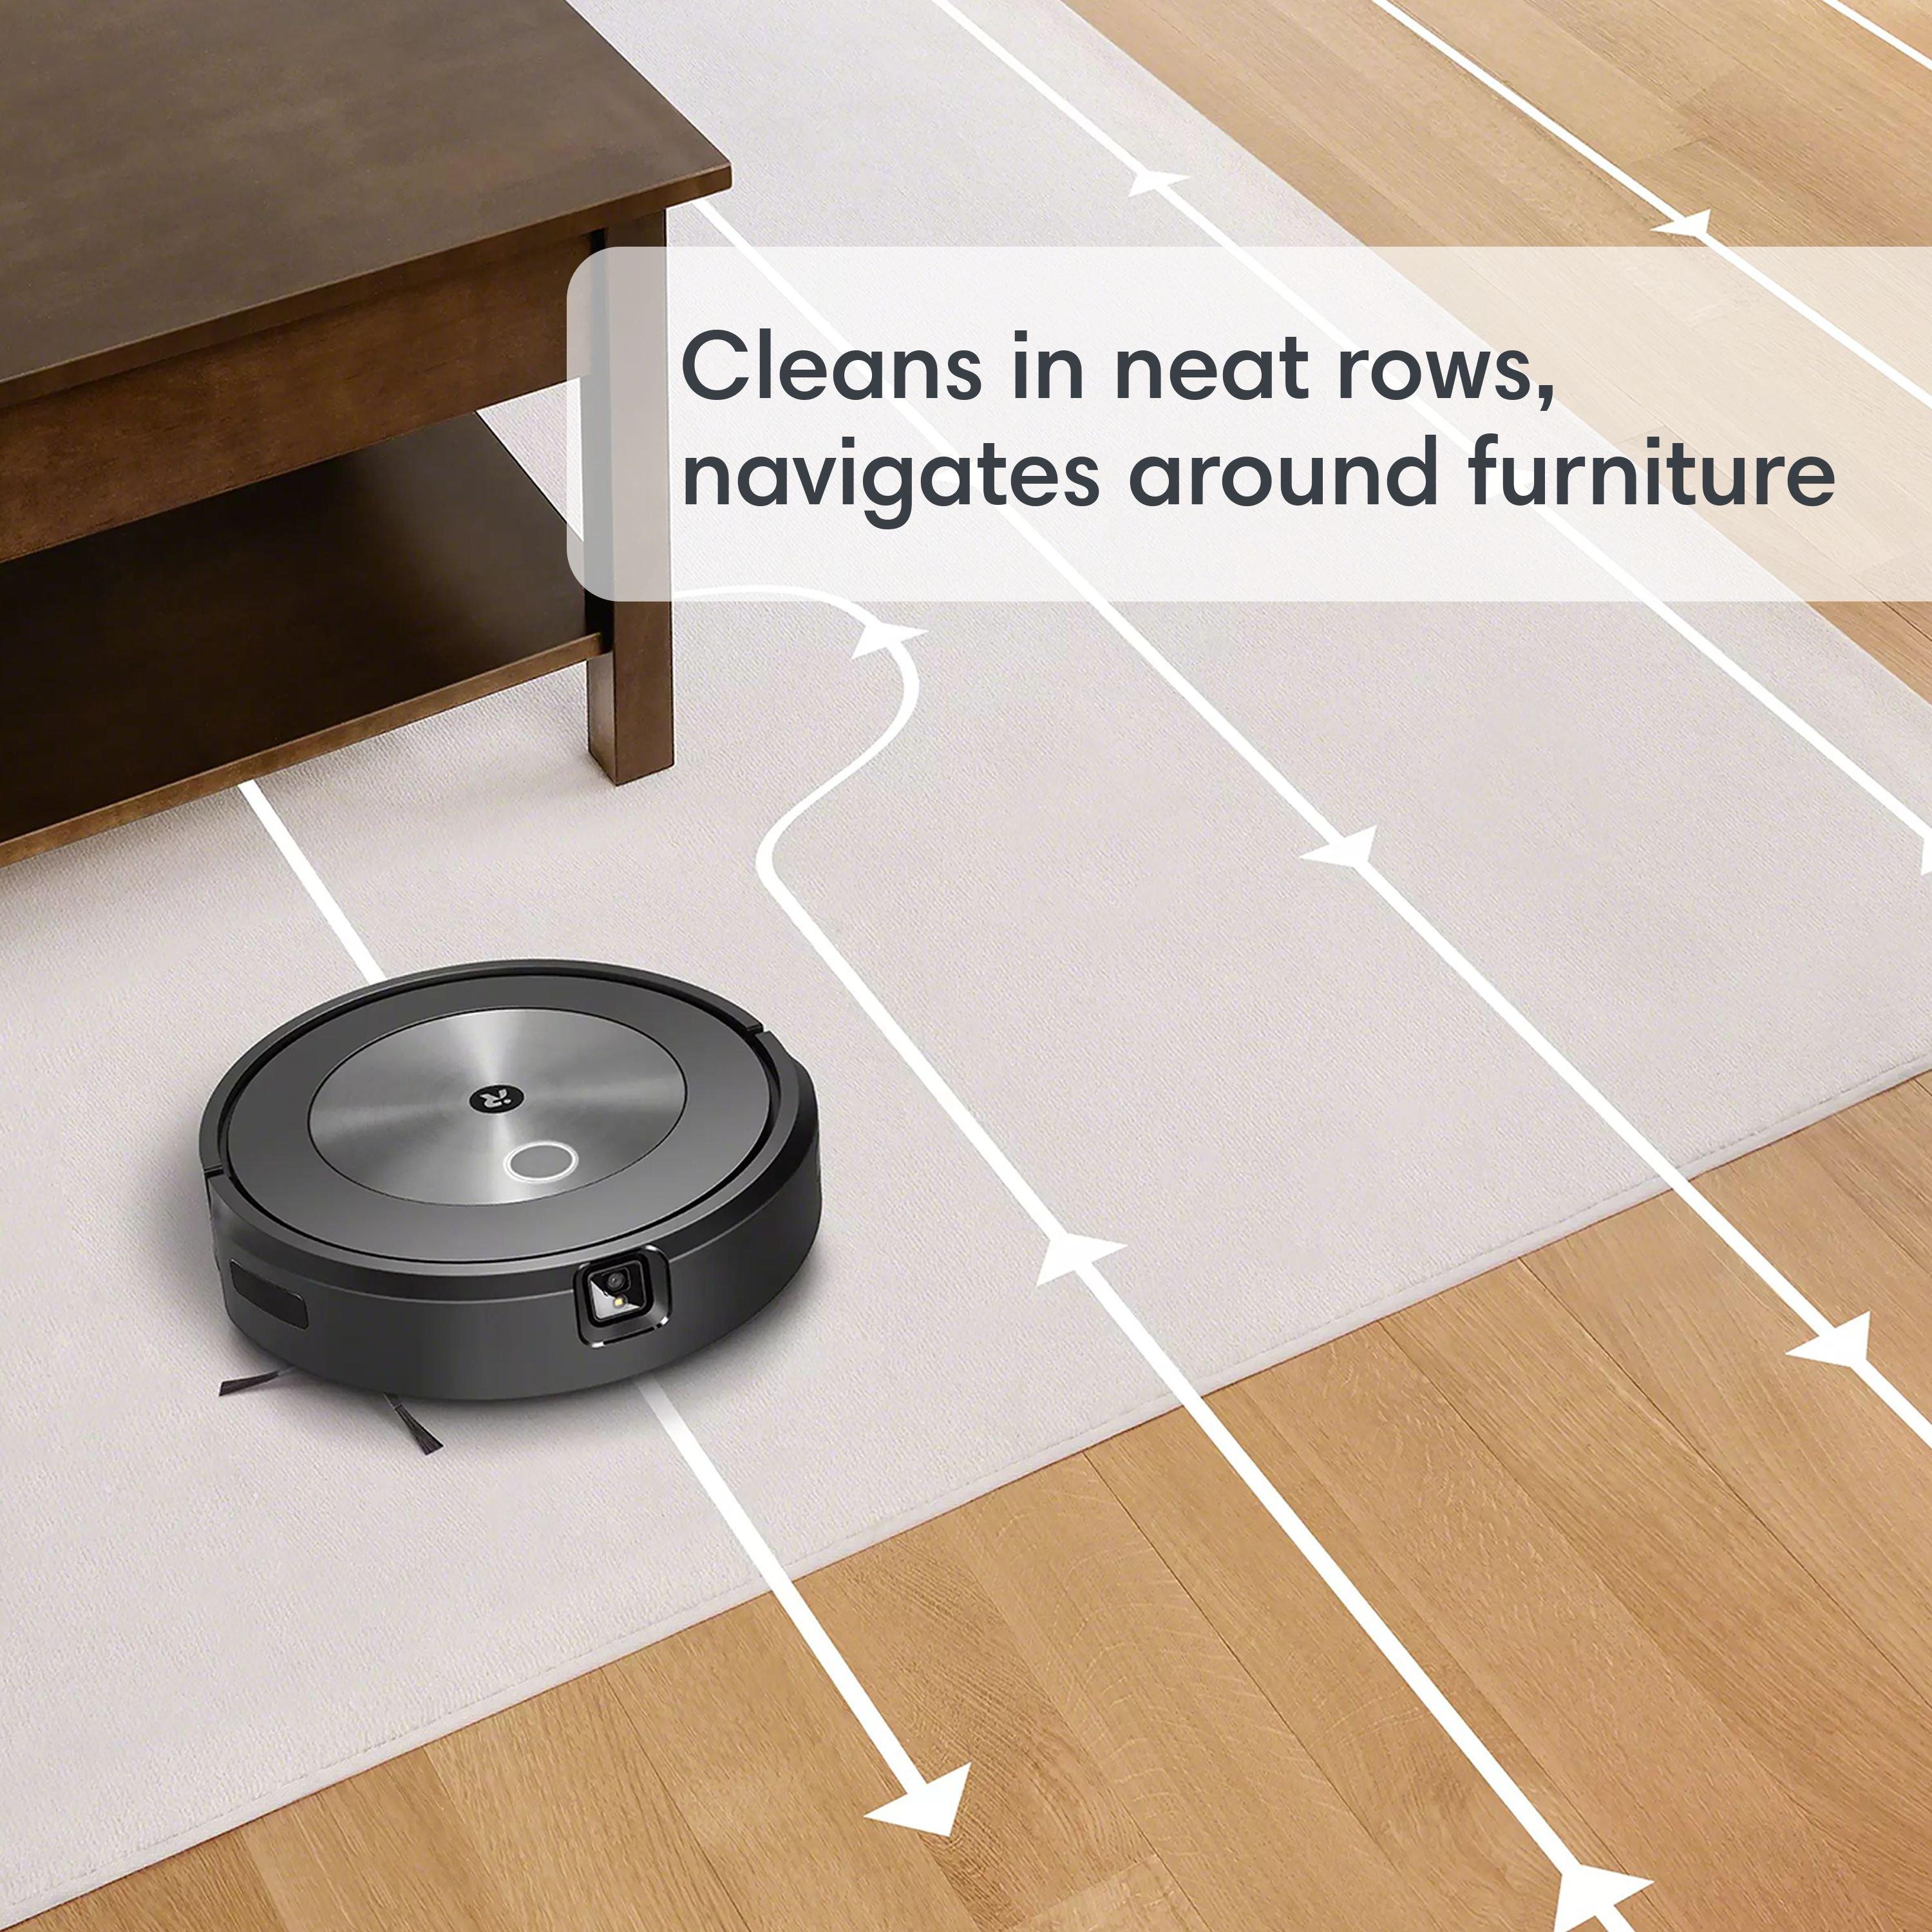  iRobot Roomba Combo j5+ Self-Emptying Robot Vacuum & Mop –  Identifies and Avoids Obstacles Like Pet Waste & Cords, Empties Itself for  60 Days, Clean by Room with Smart Mapping